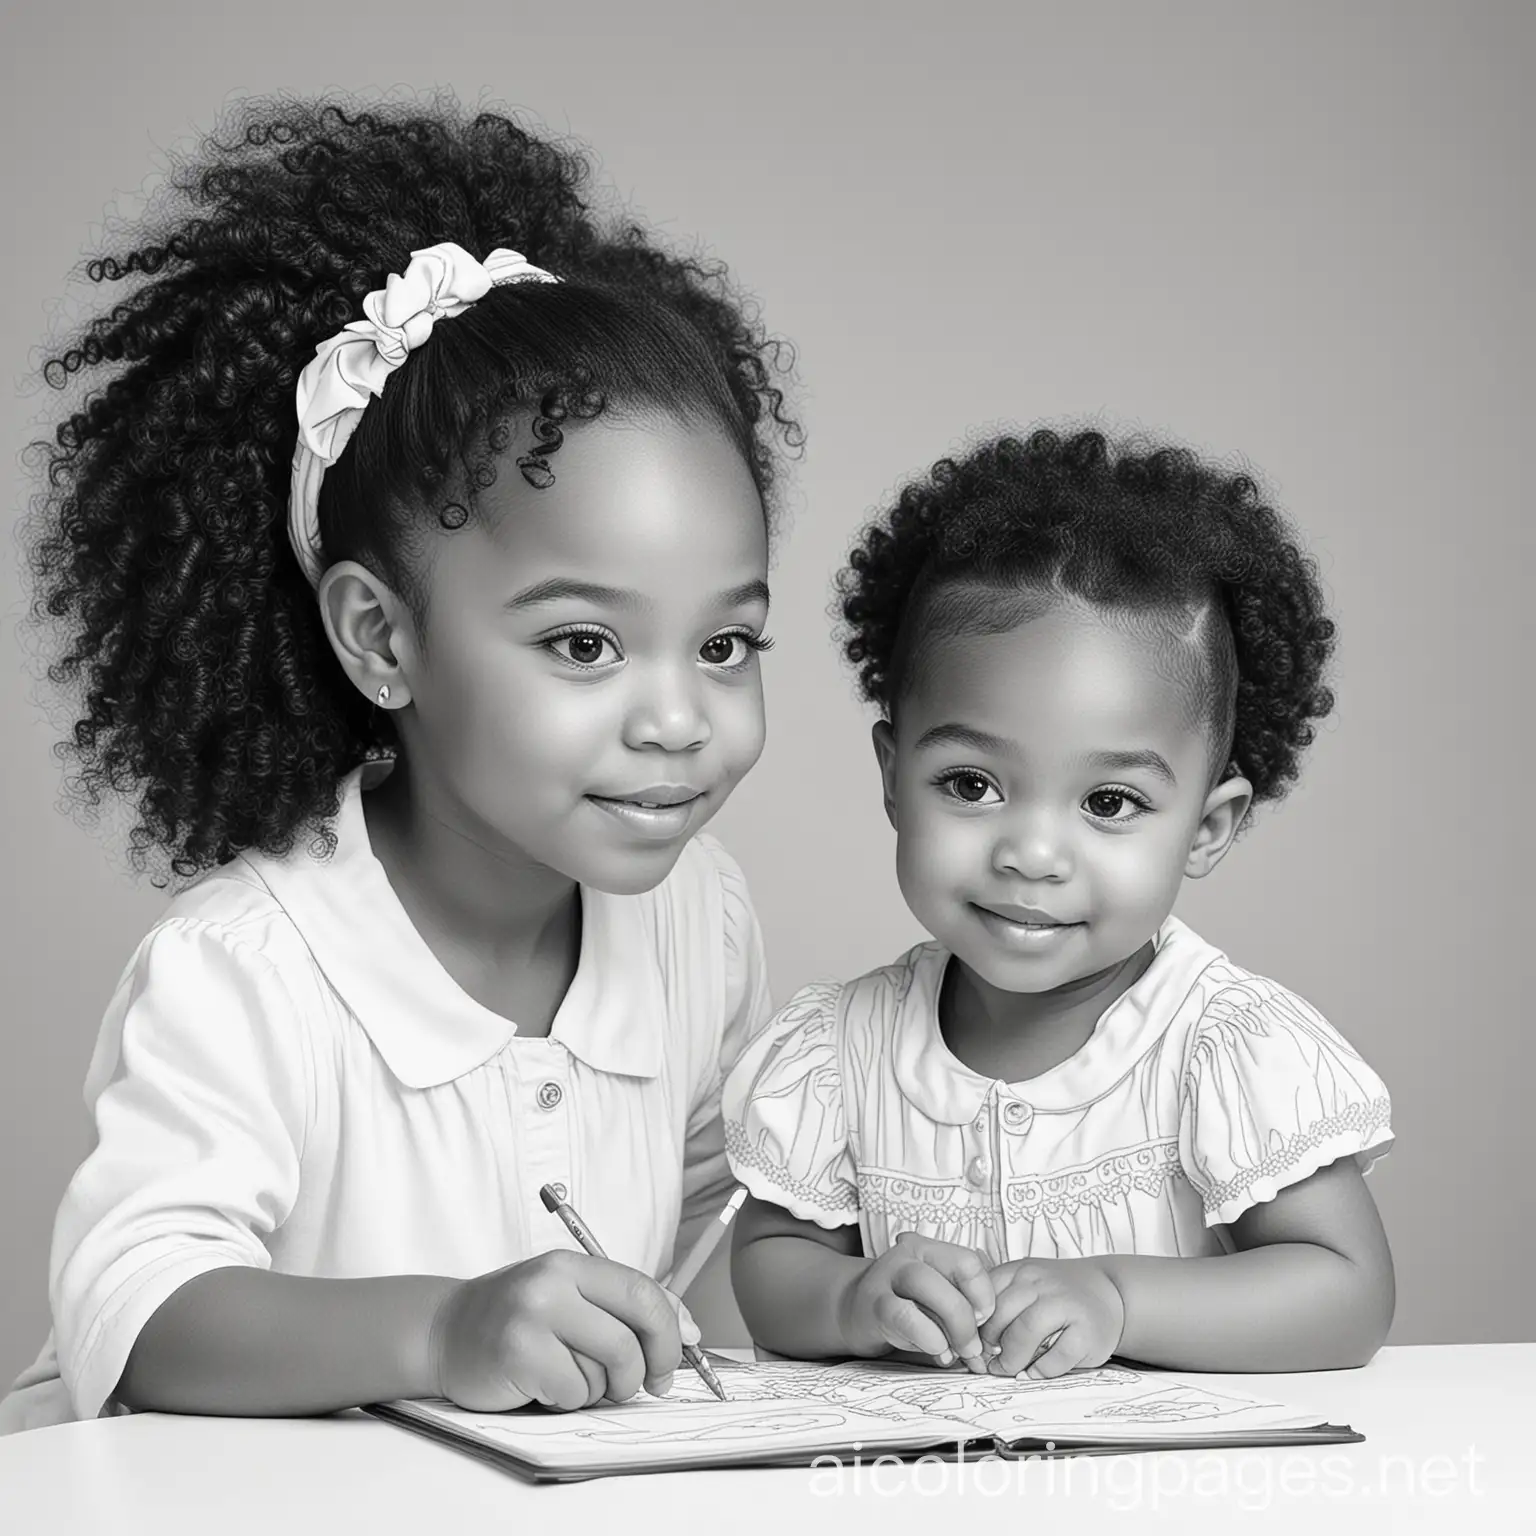 

the 2 big african america sisters that teach there baby sister, Coloring Page, black and white, line art, white background, Simplicity, Ample White Space. The background of the coloring page is plain white to make it easy for young children to color within the lines. The outlines of all the subjects are easy to distinguish, making it simple for kids to color without too much difficulty